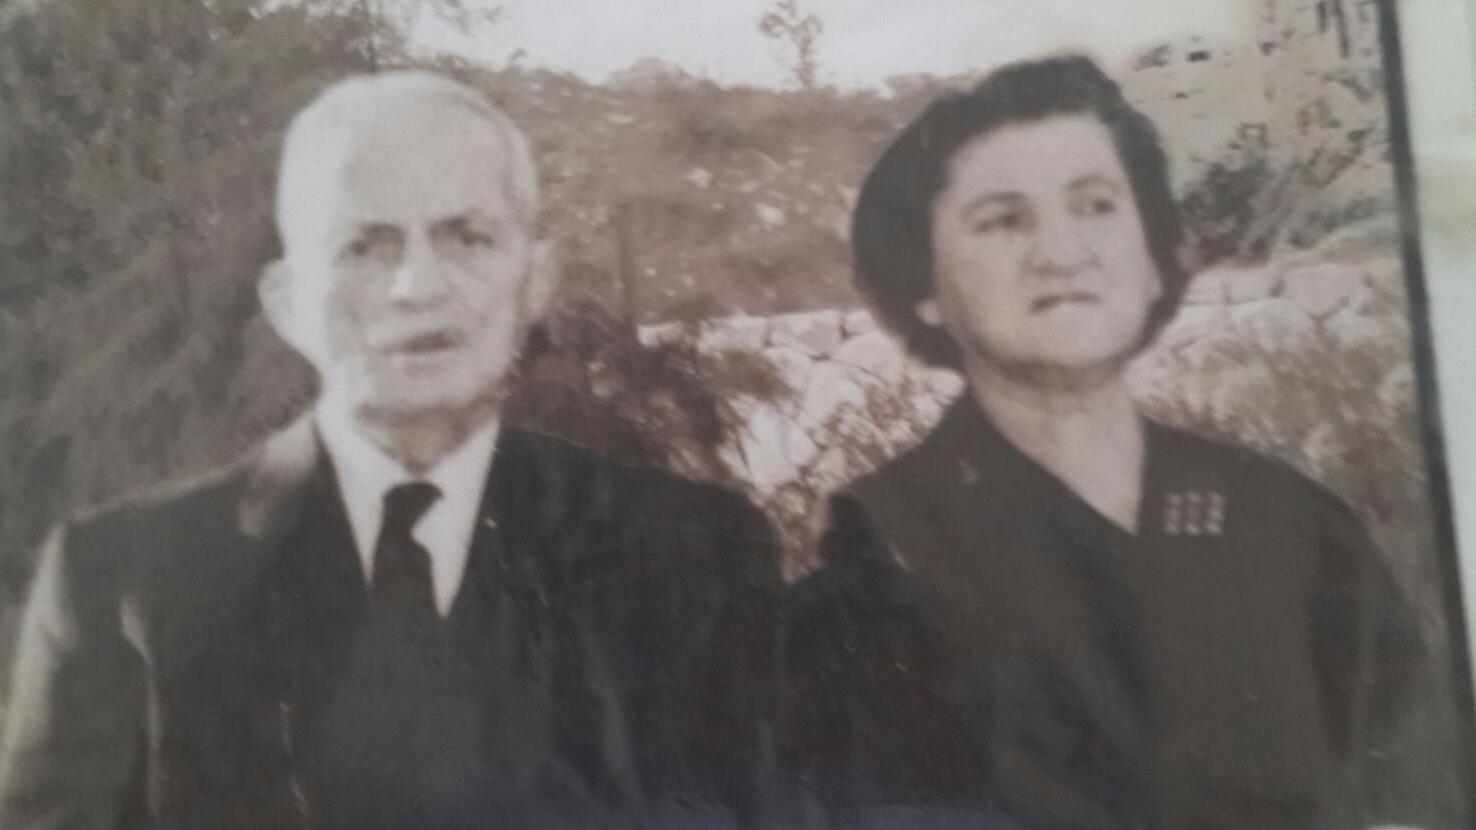 Jaber Rahil and his wife, Alegra Belo. When they were young, the two fell in love, but Alegra was Jewish, and Jaber was an Arab Christian. 